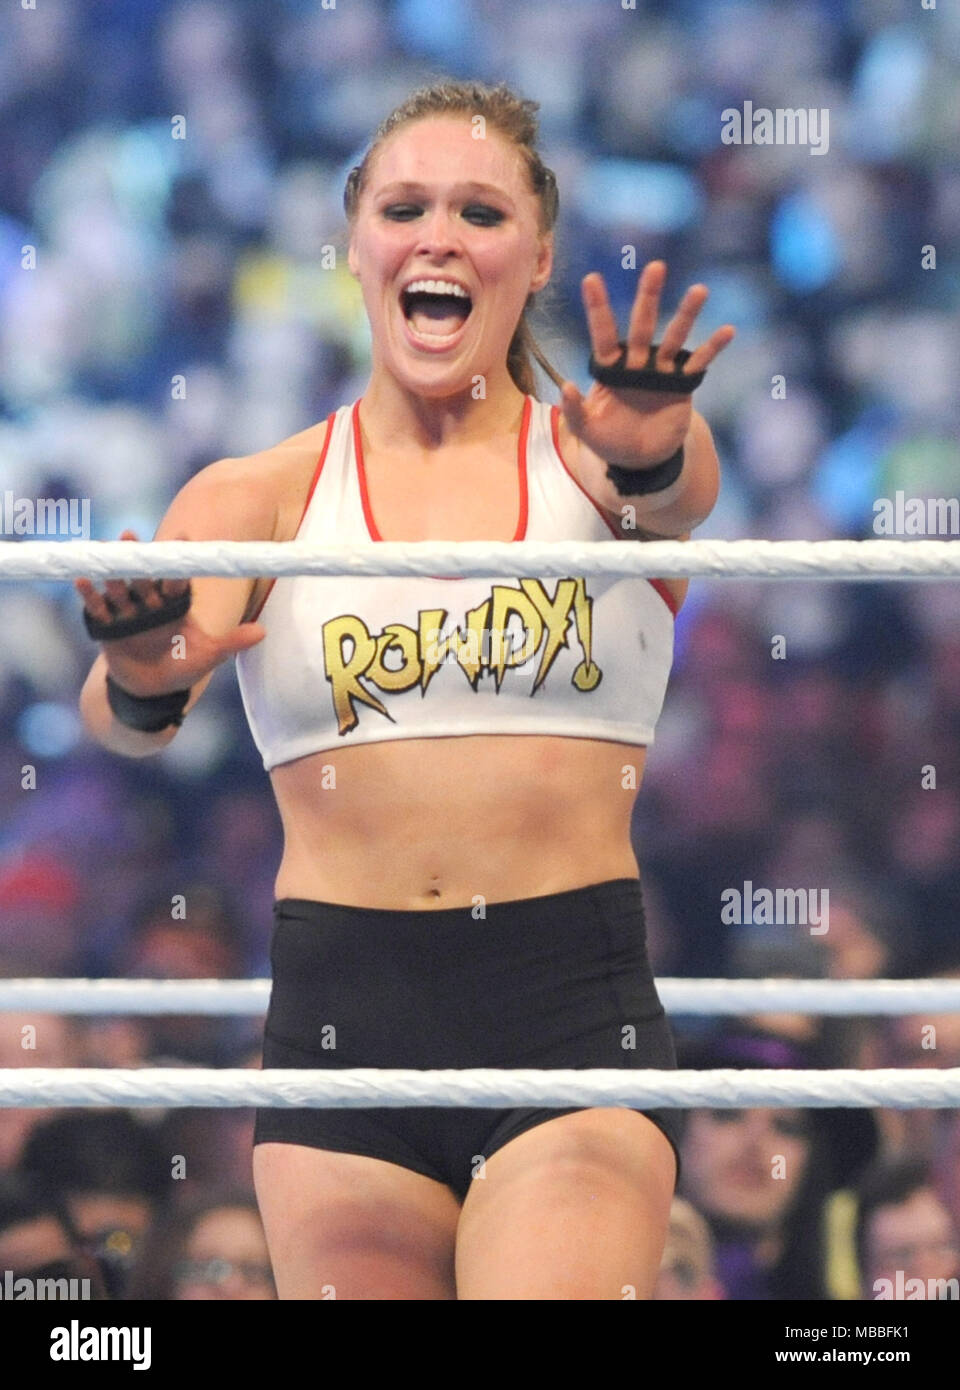 New Orleans, LA, USA. 8th Apr, 2018. Ronda Rousey at WWE Wrestlemania 34 at the Mercedes-Benz Superdome in New Orleans, Louisiana on April 8, 2018. Credit: George Napolitano/Media Punch/Alamy Live News Stock Photo